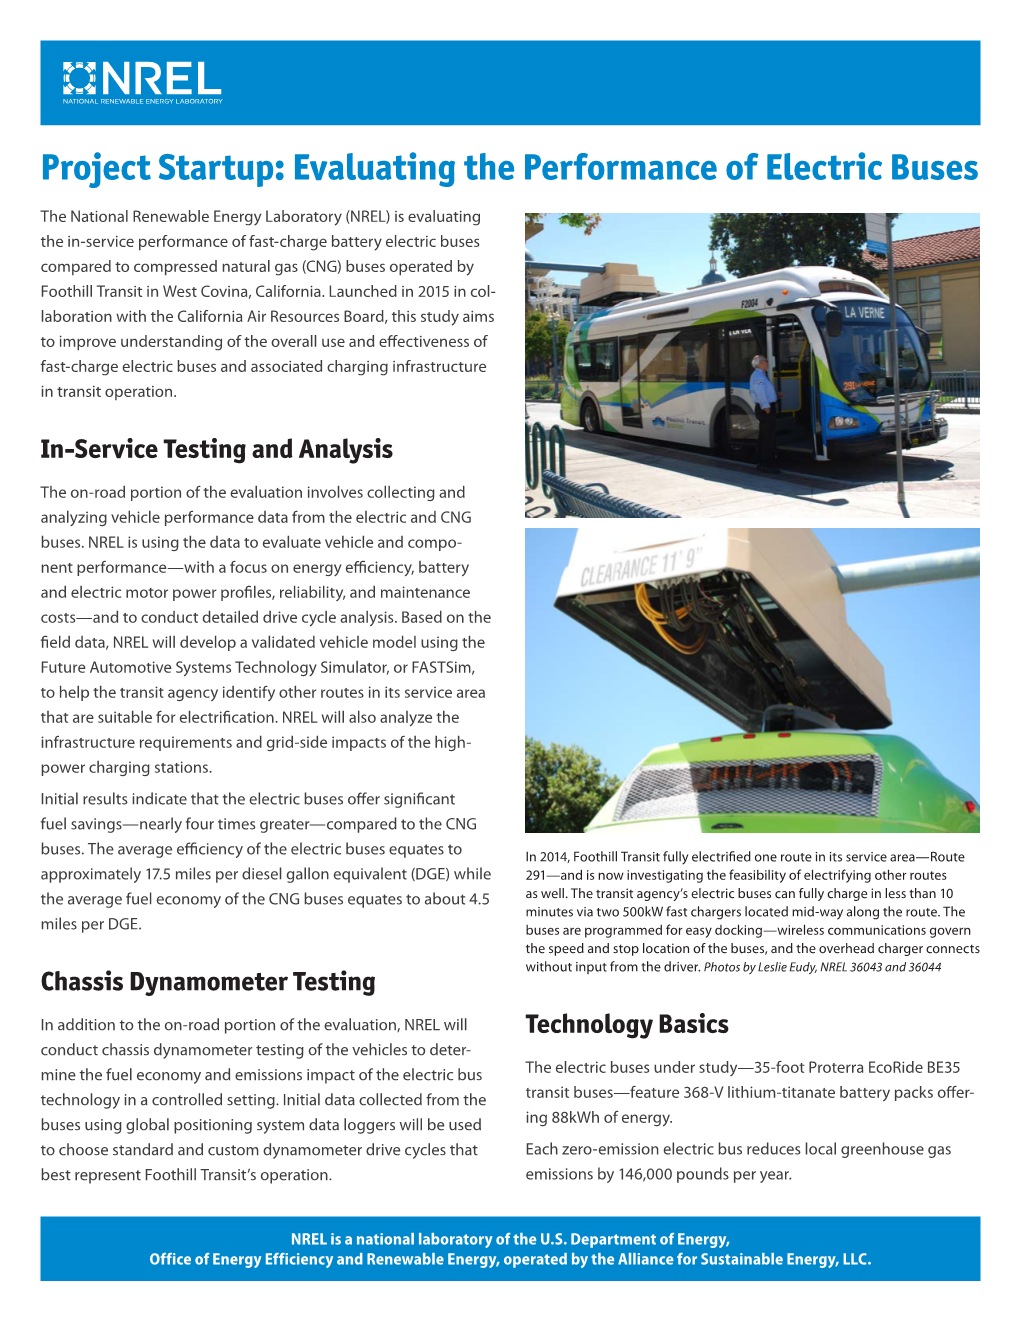 Evaluating the Performance of Electric Buses